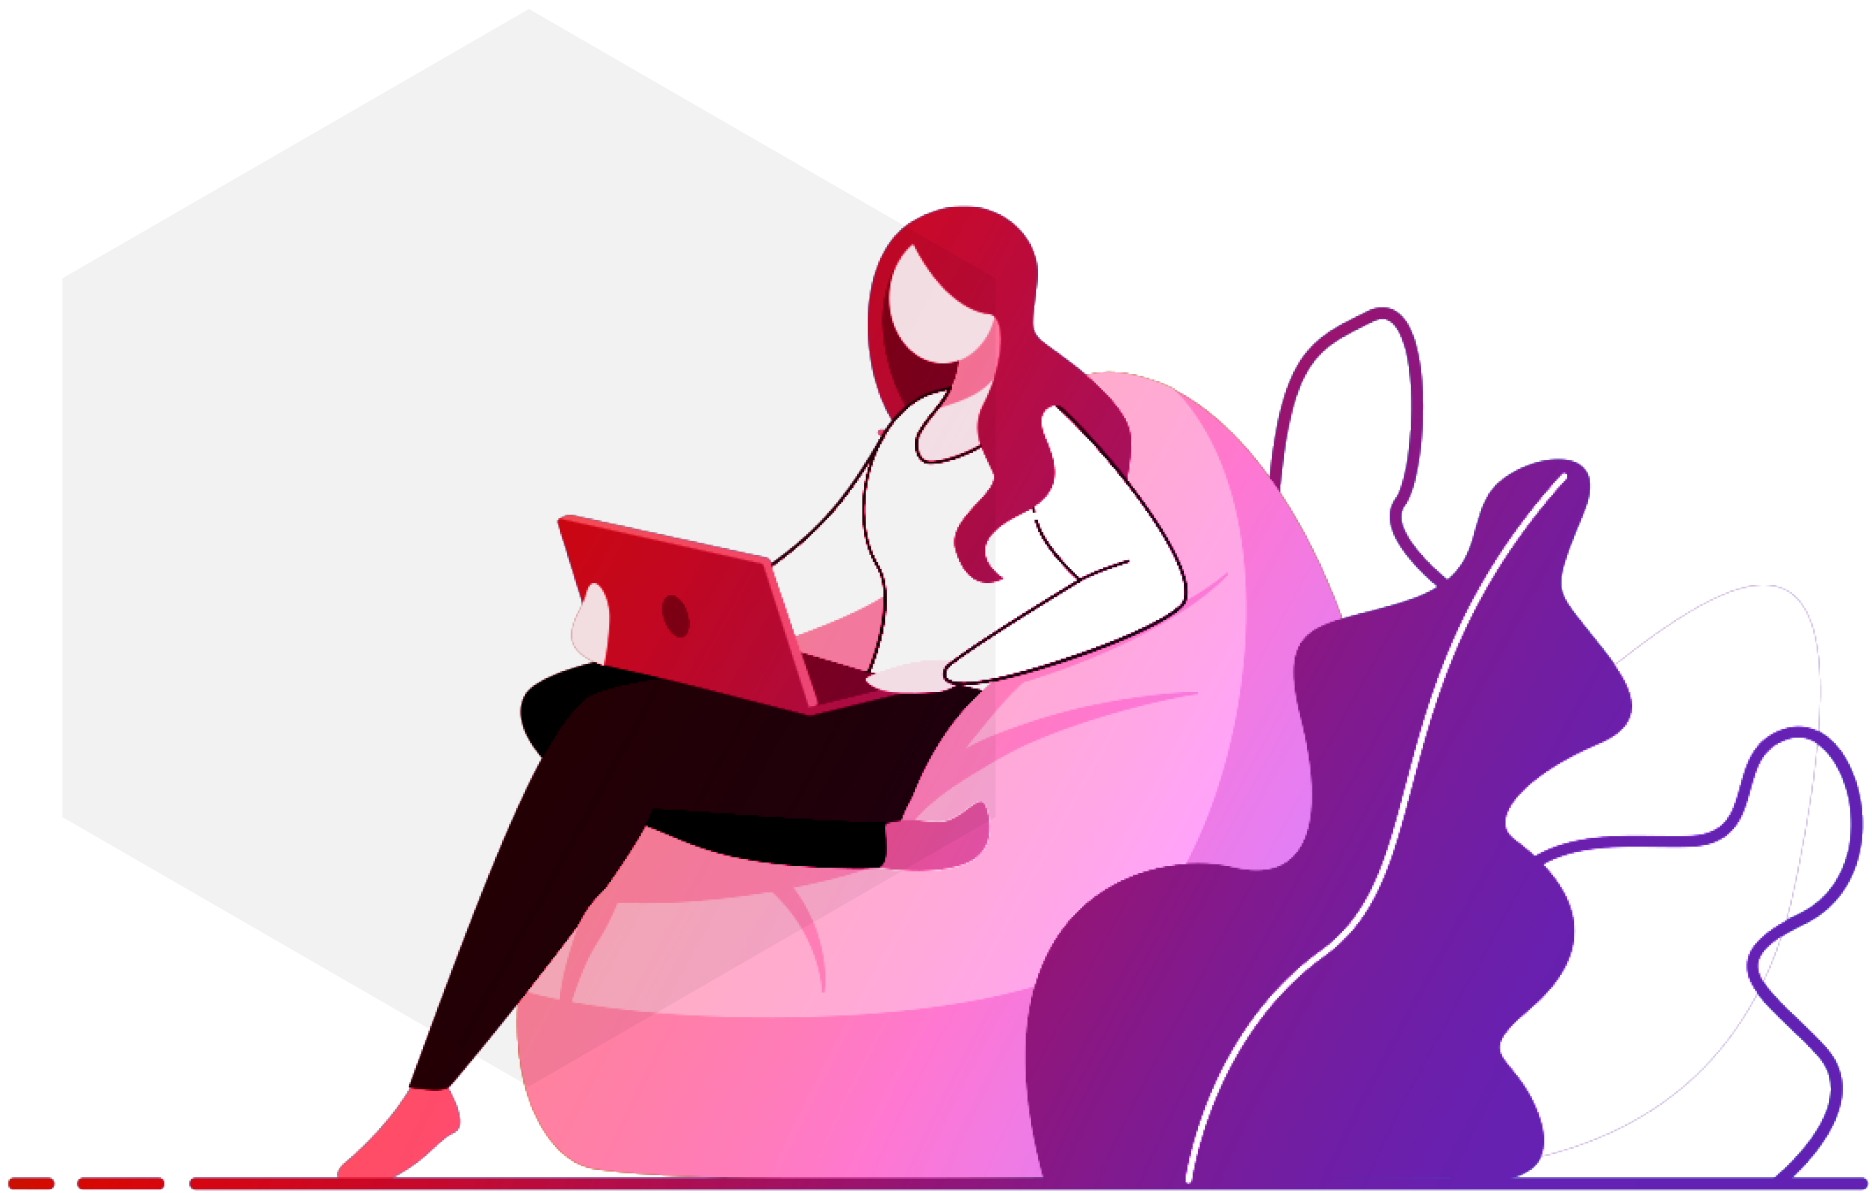 Illustration depicting woman sitting on beanbag with a laptop computer